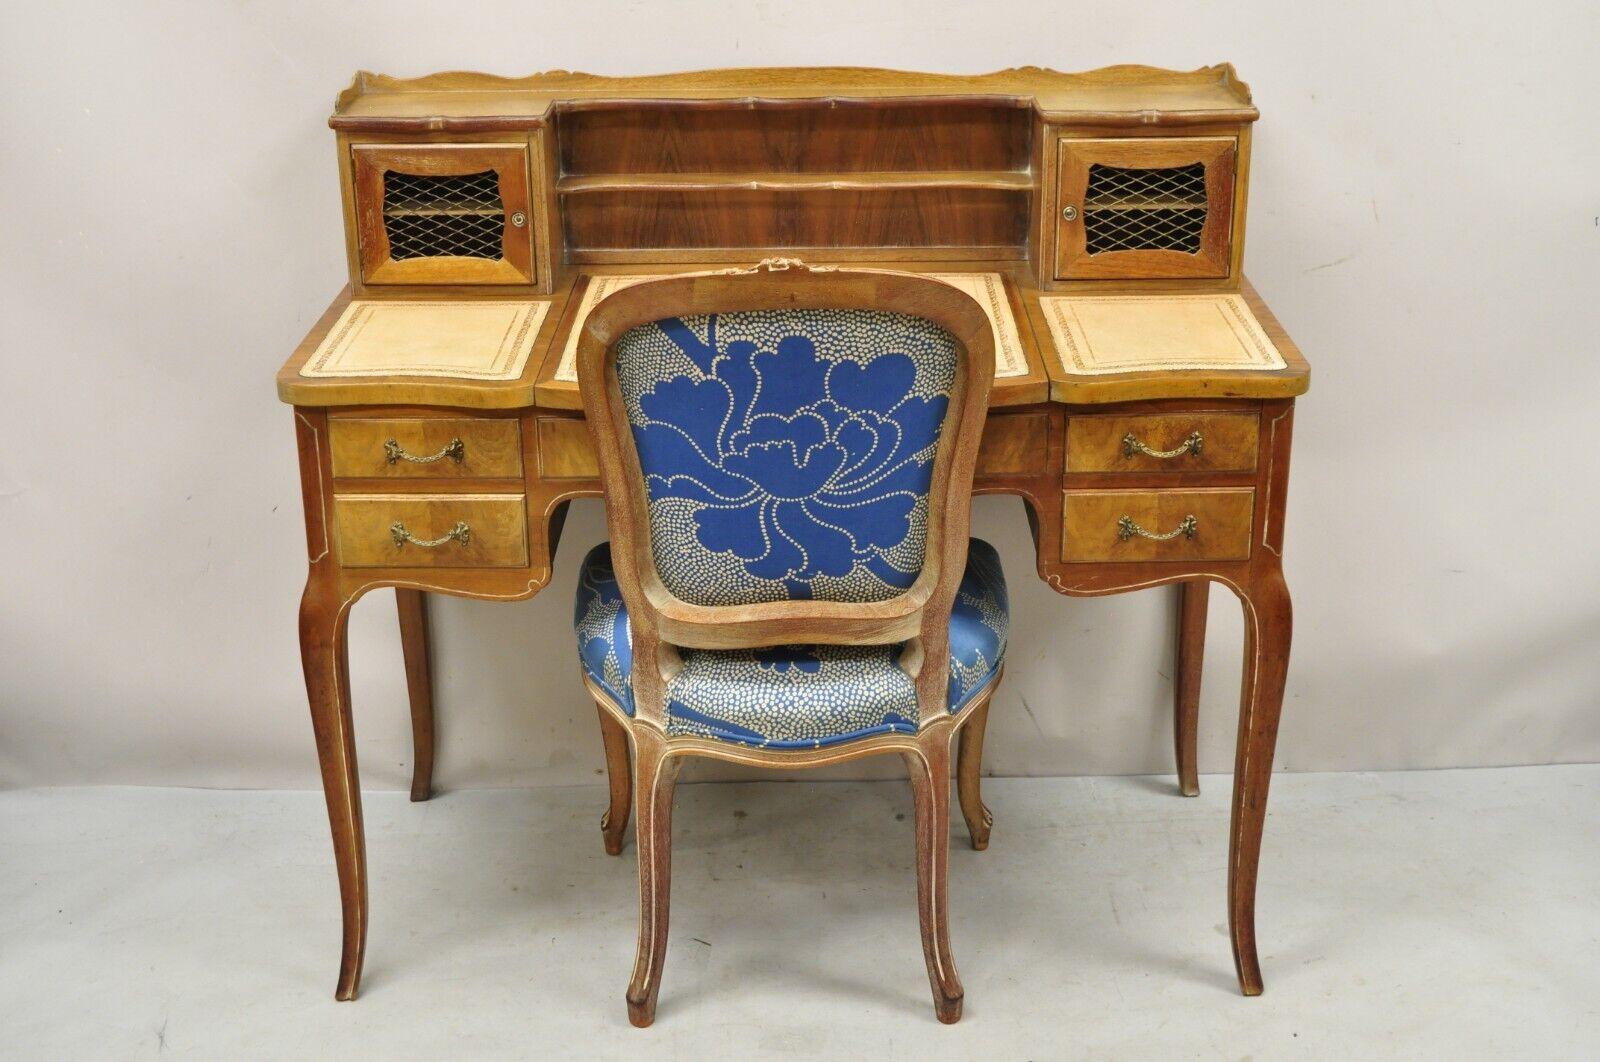 Vintage French Provincial Louis XV Style leather top vanity desk with mirror and side chair. Item features a white washed finish, floral carved accents, blue floral print fabric, flip top with mirror, tooled leather top, solid wood frame, beautiful